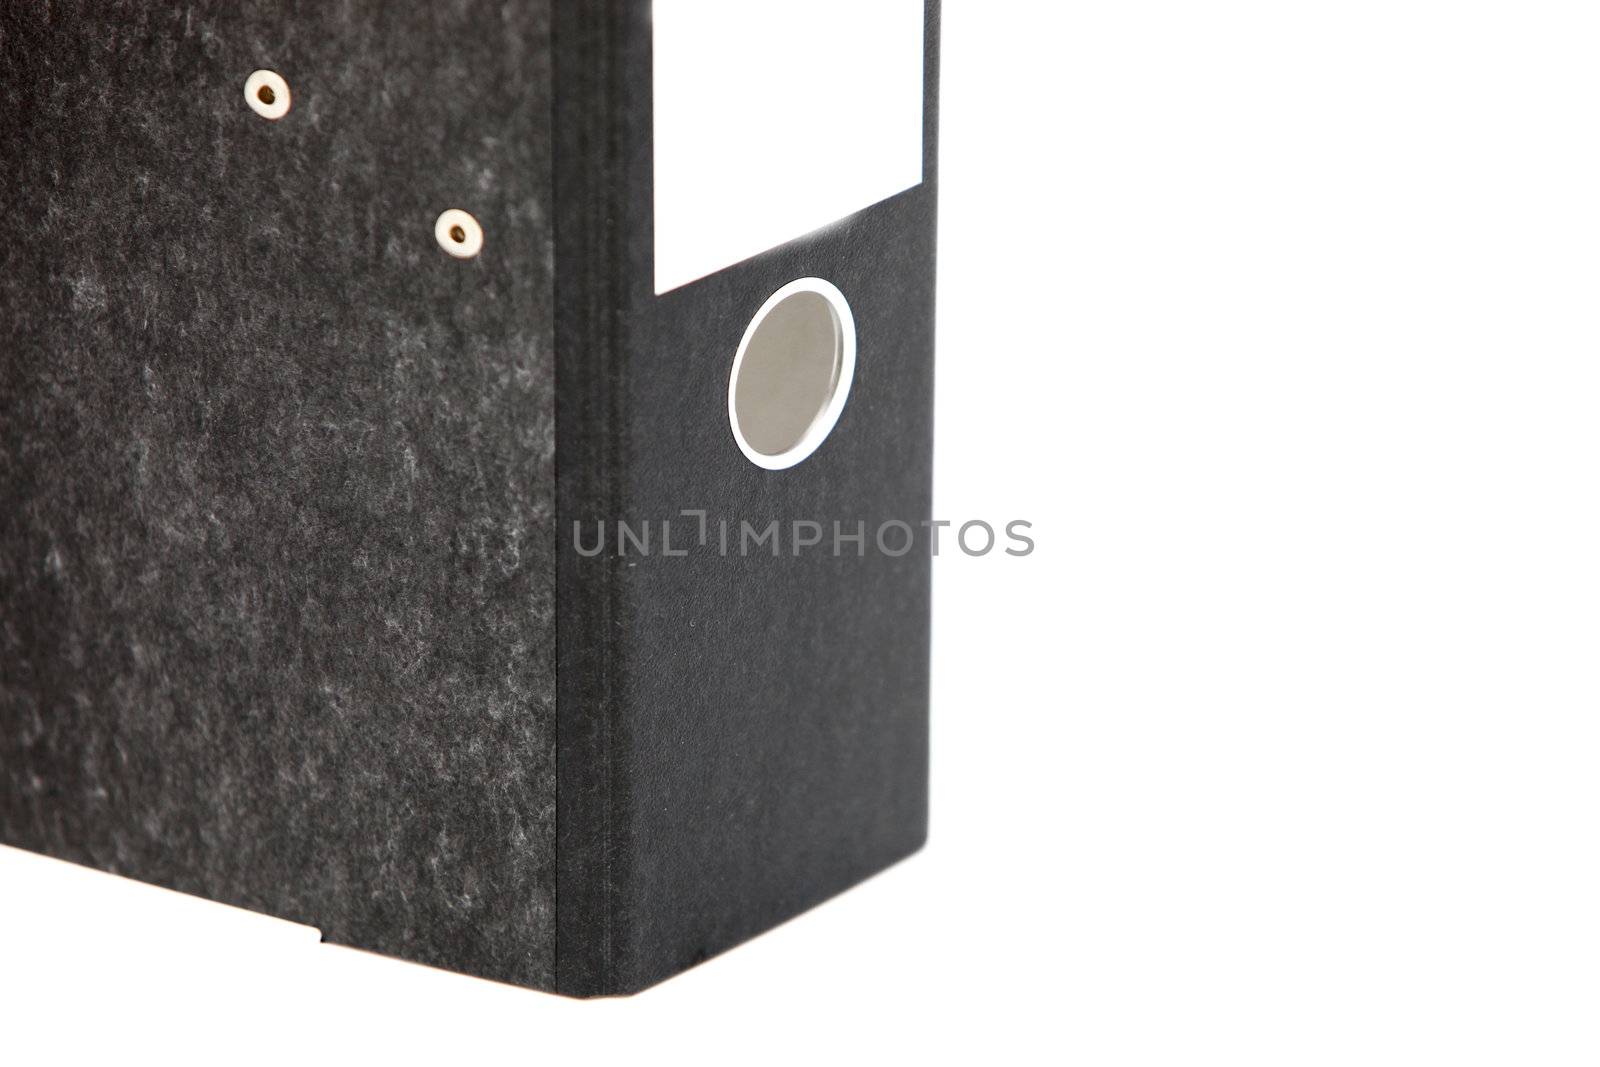 Lower half of a black hardcover office binder showing the metal ring to insert your finger to pull it off the shelf isolated on white